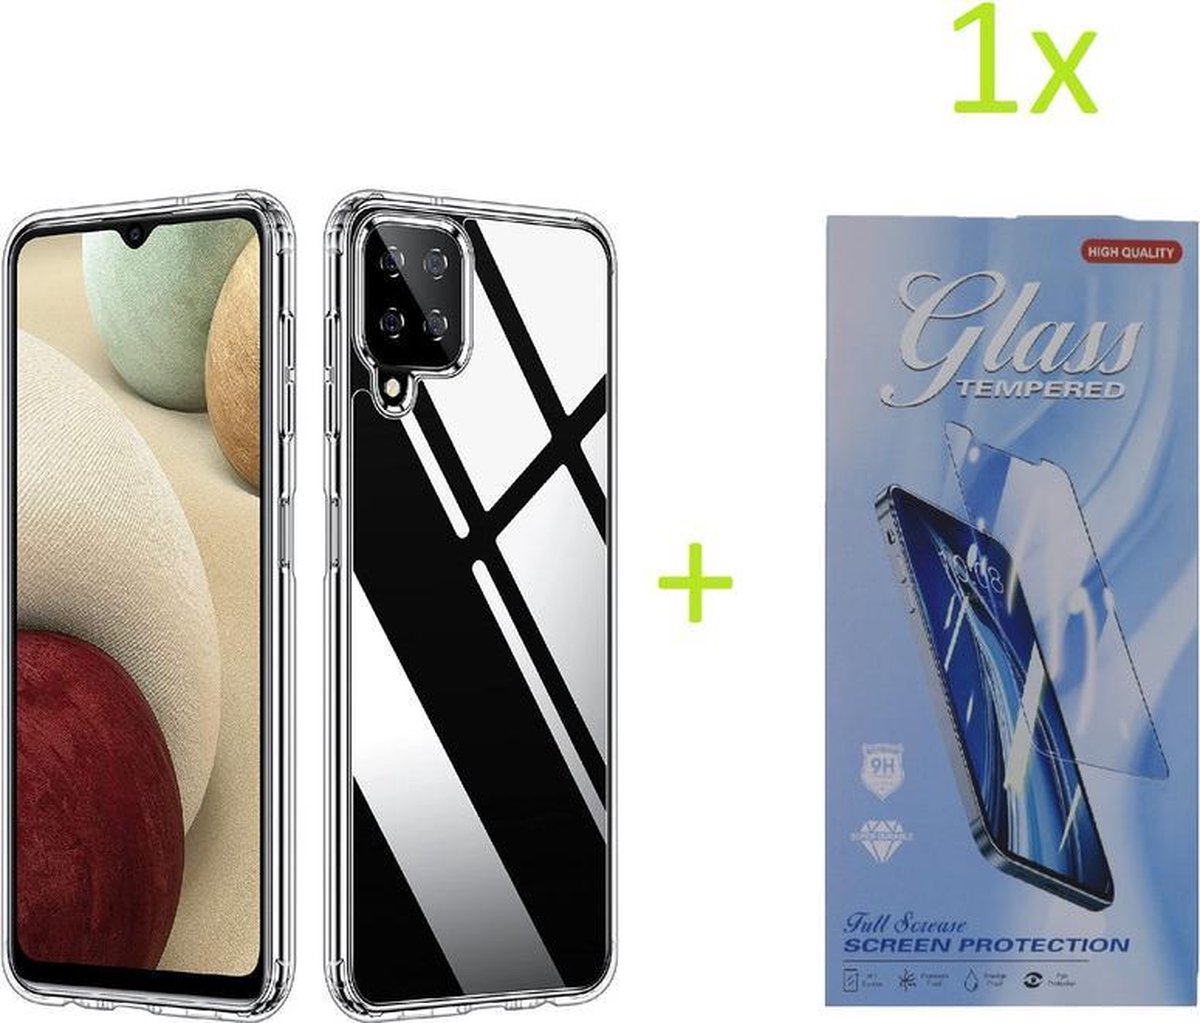 Soft Back Cover Hoesje Geschikt voor: Samsung Galaxy A12 Transparant TPU Siliconen Soft Case + 1X Tempered Glass Screenprotector